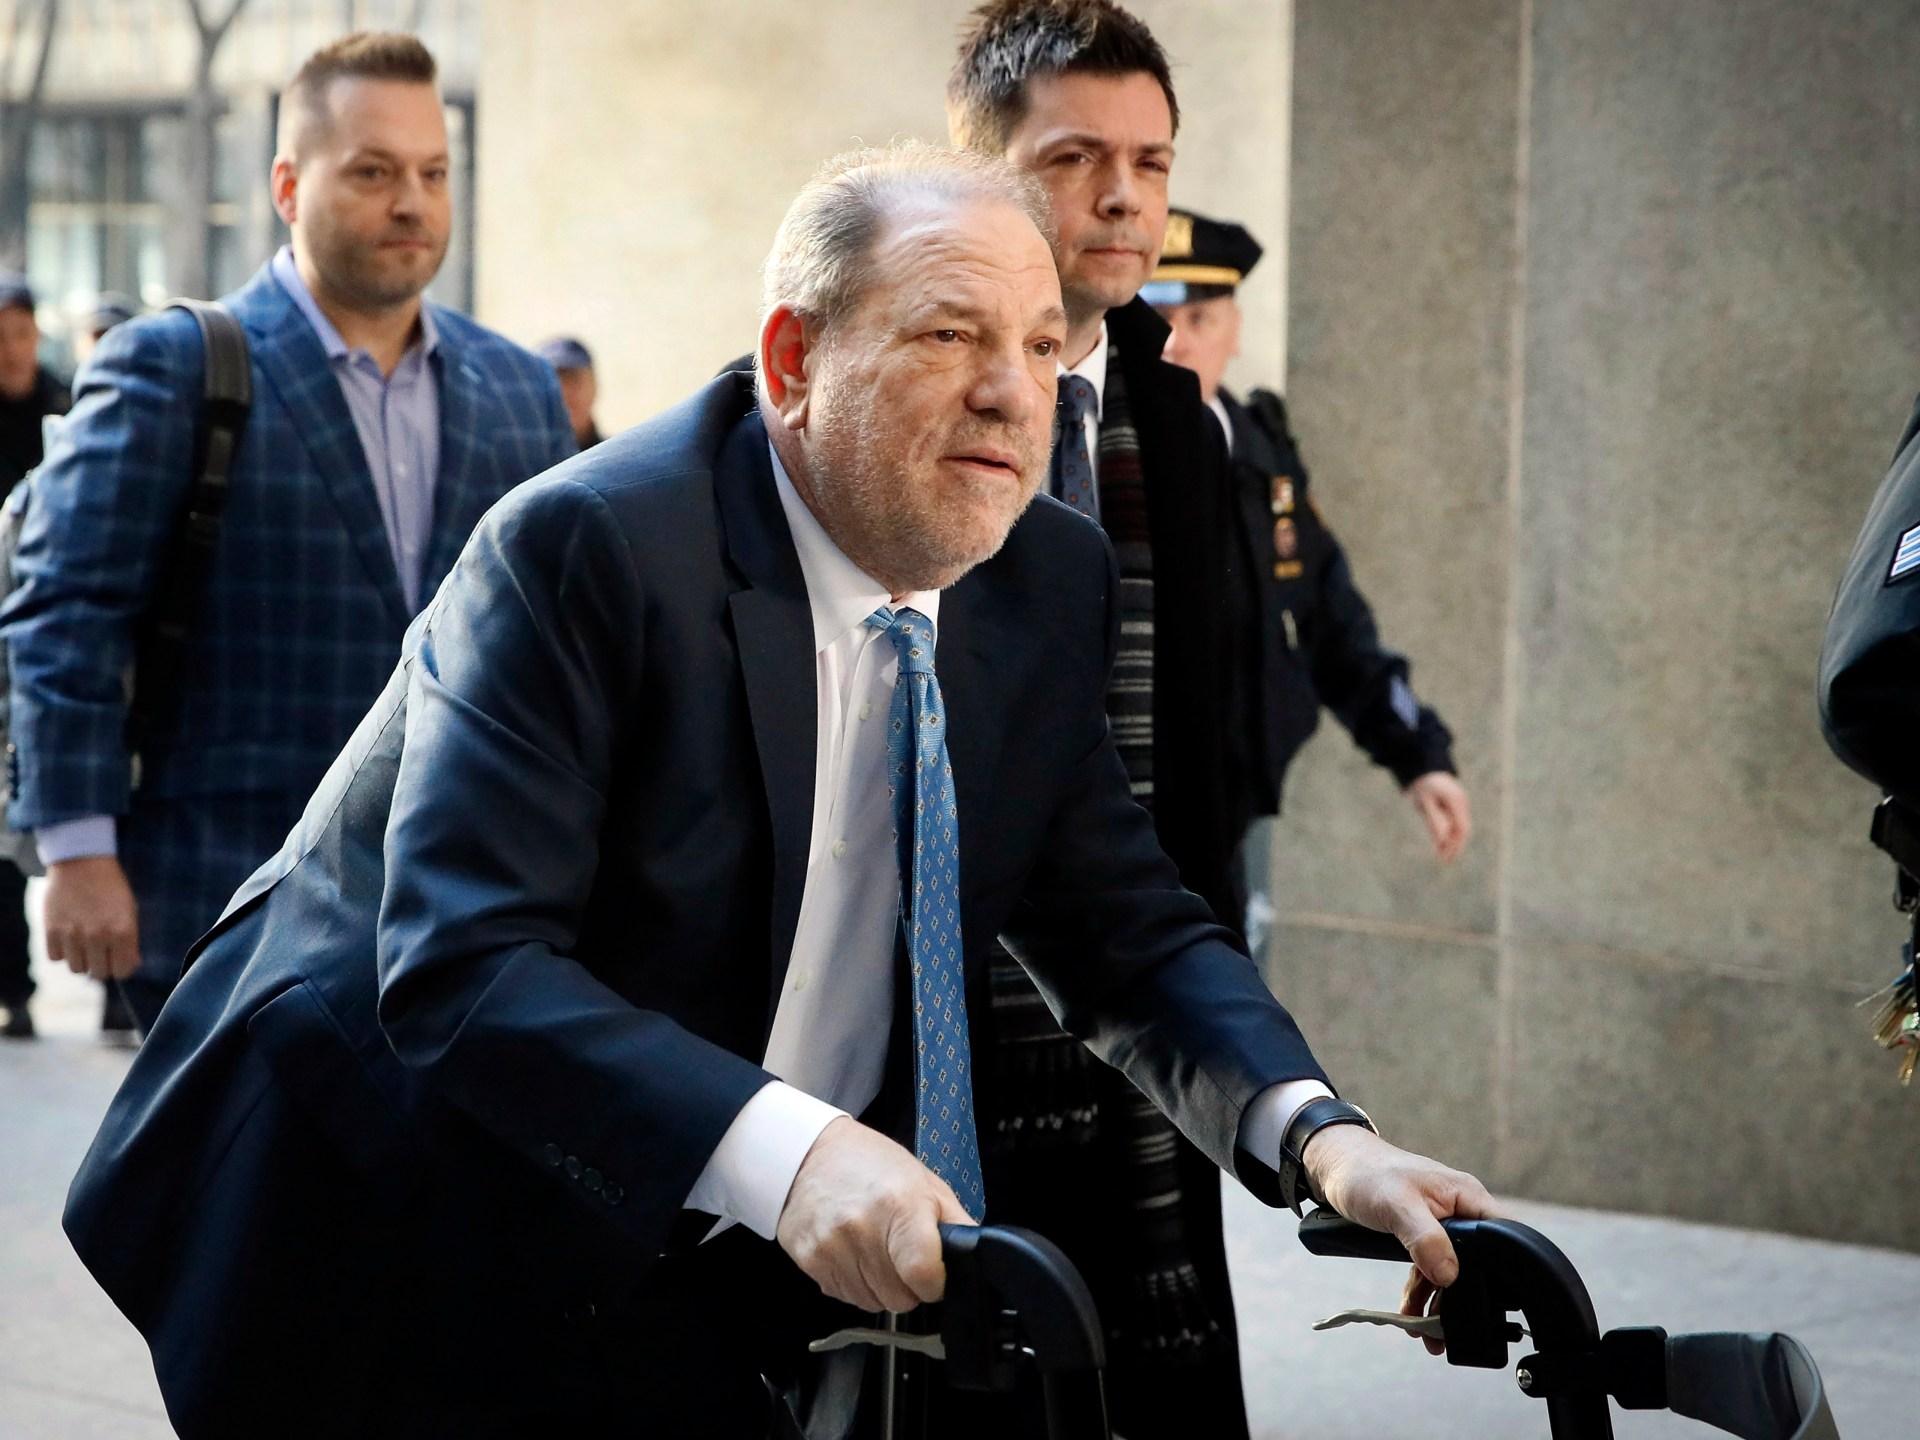 Hollywood producer Harvey Weinstein in hospital after conviction overturned | Sexual Assault News